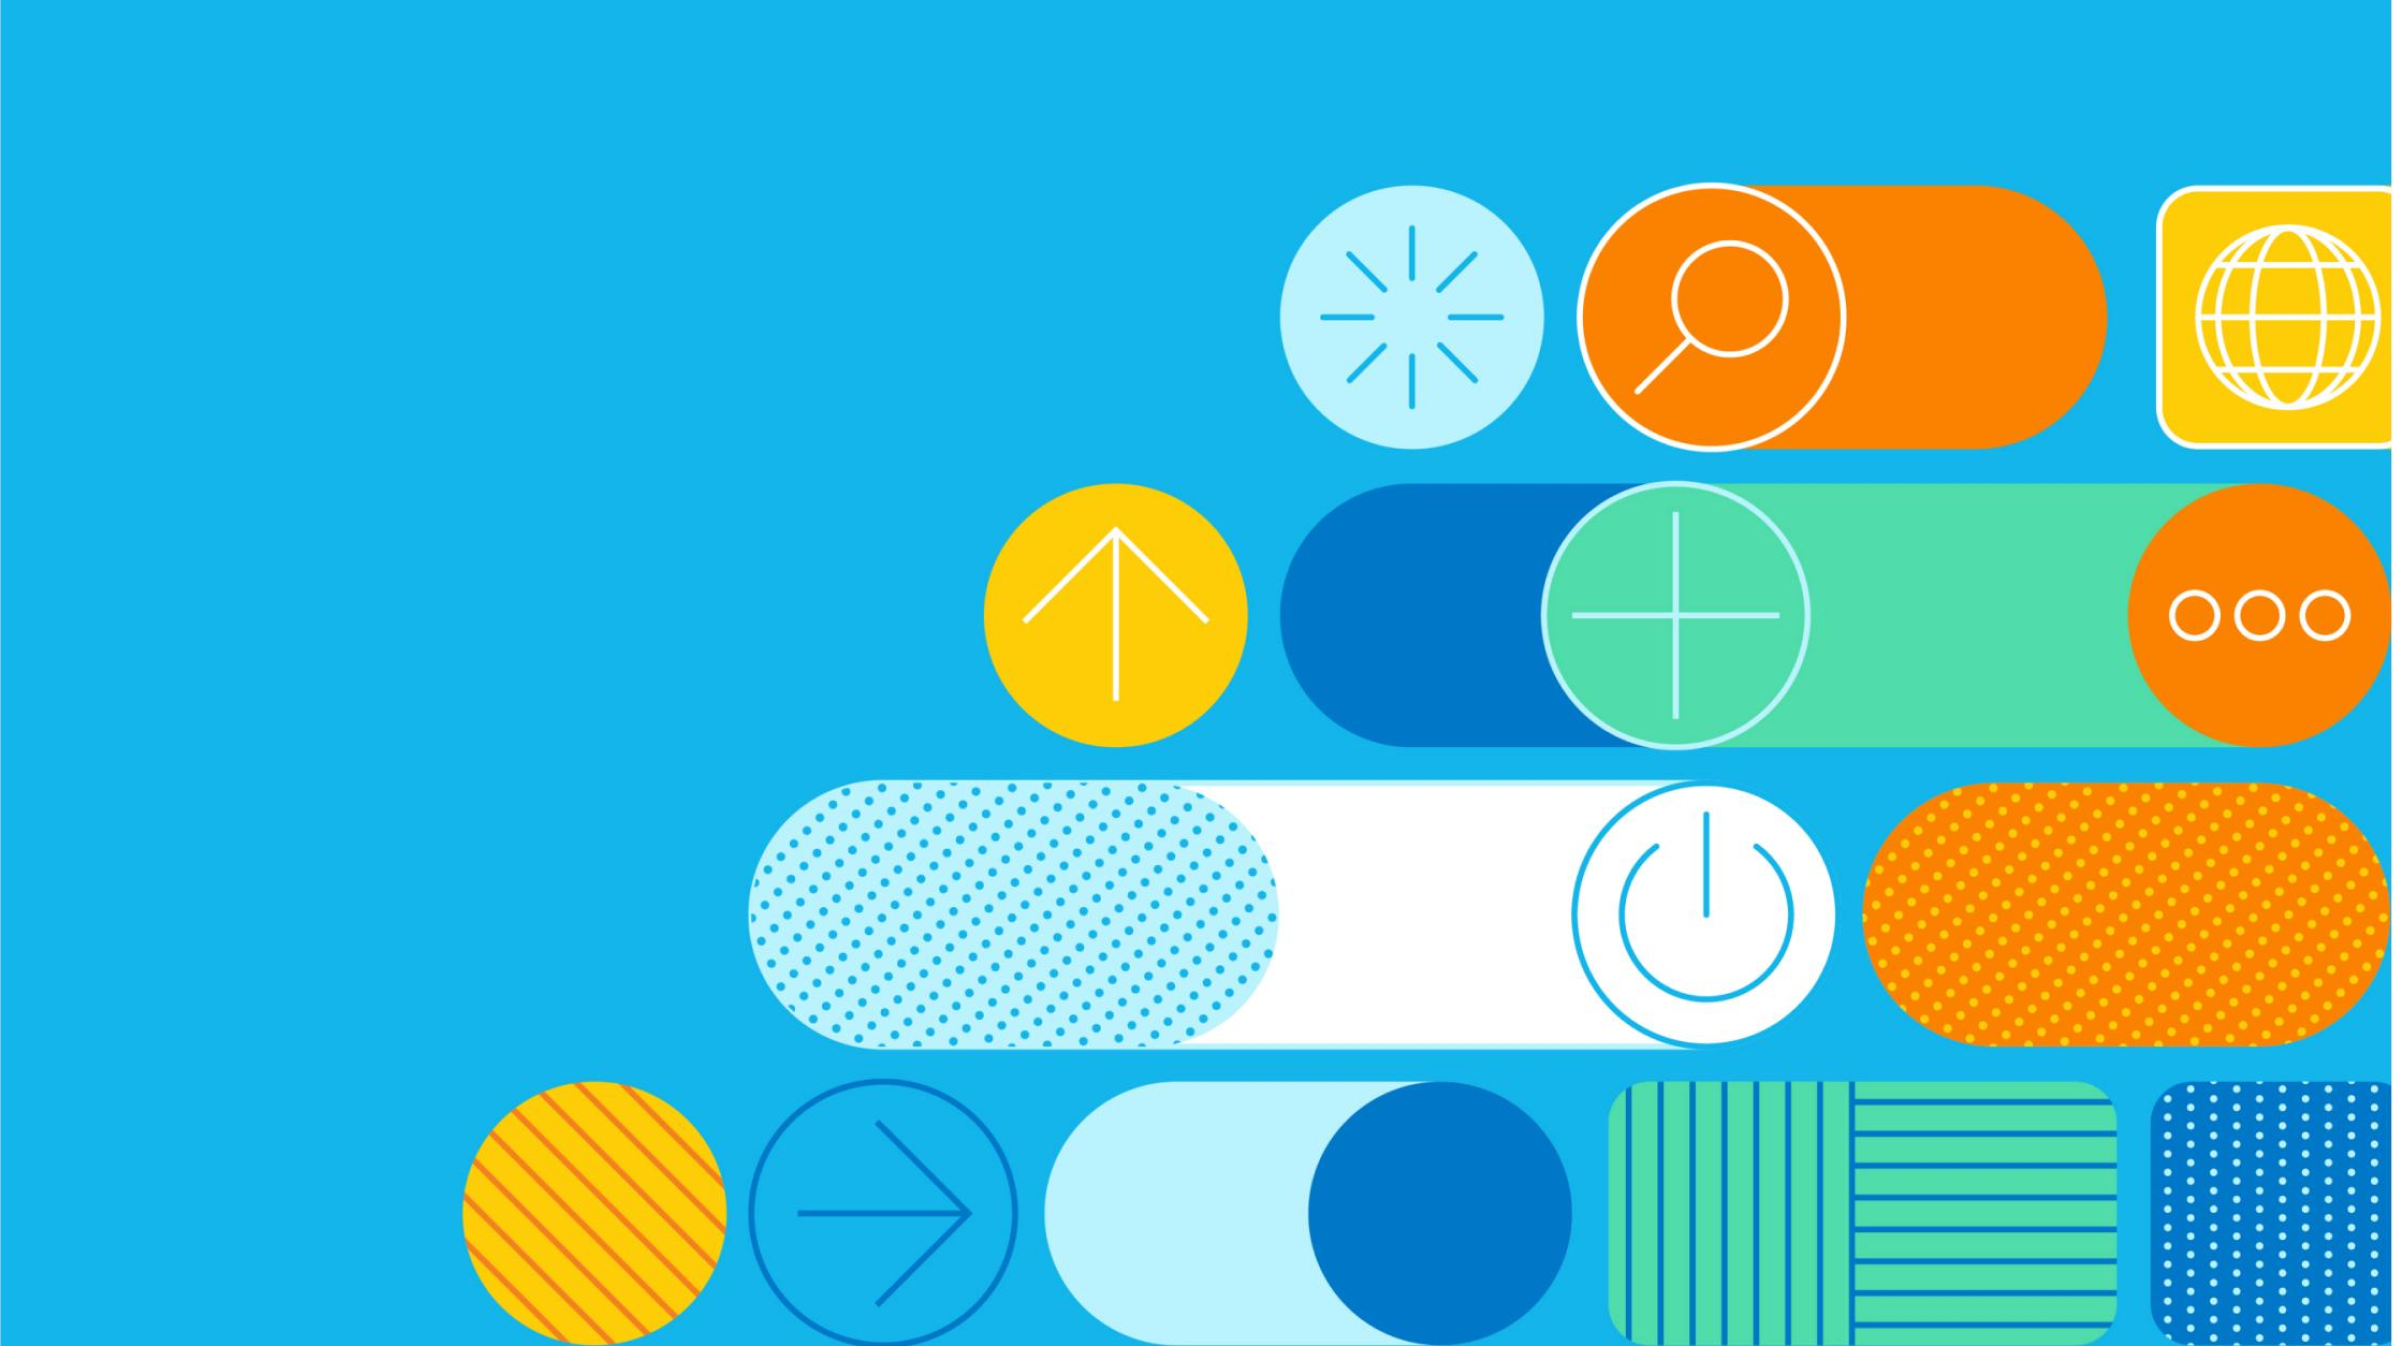 Colourful circles and shape against a blue background.